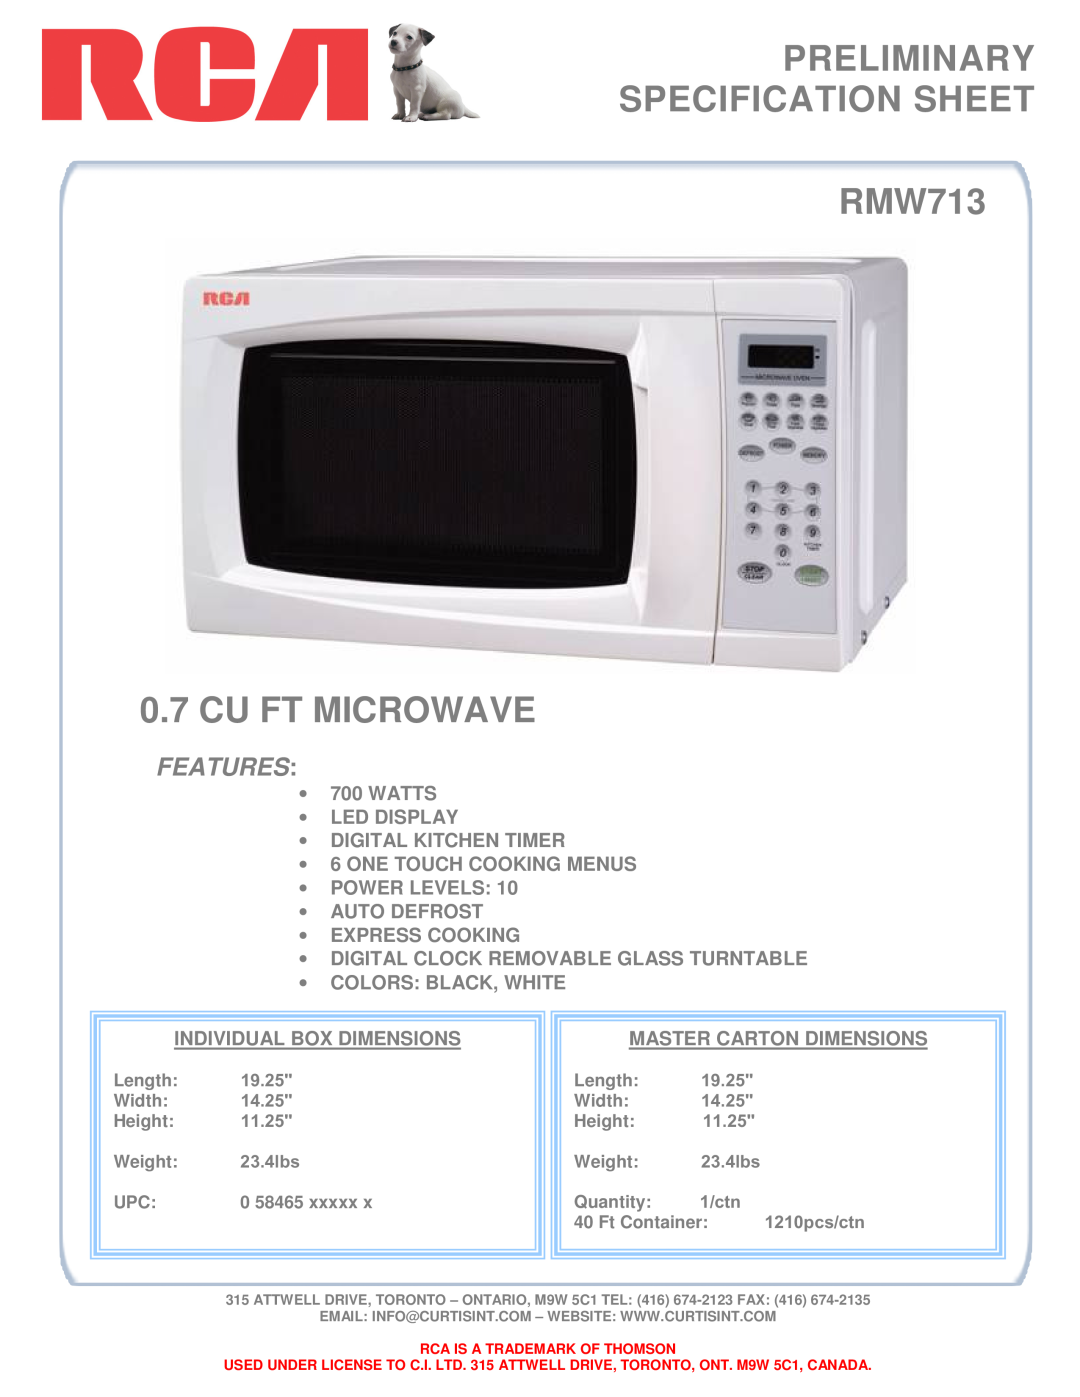 Curtis dimensions PRELIMINARY SPECIFICATION SHEET RMW713, Cu Ft Microwave, Features 